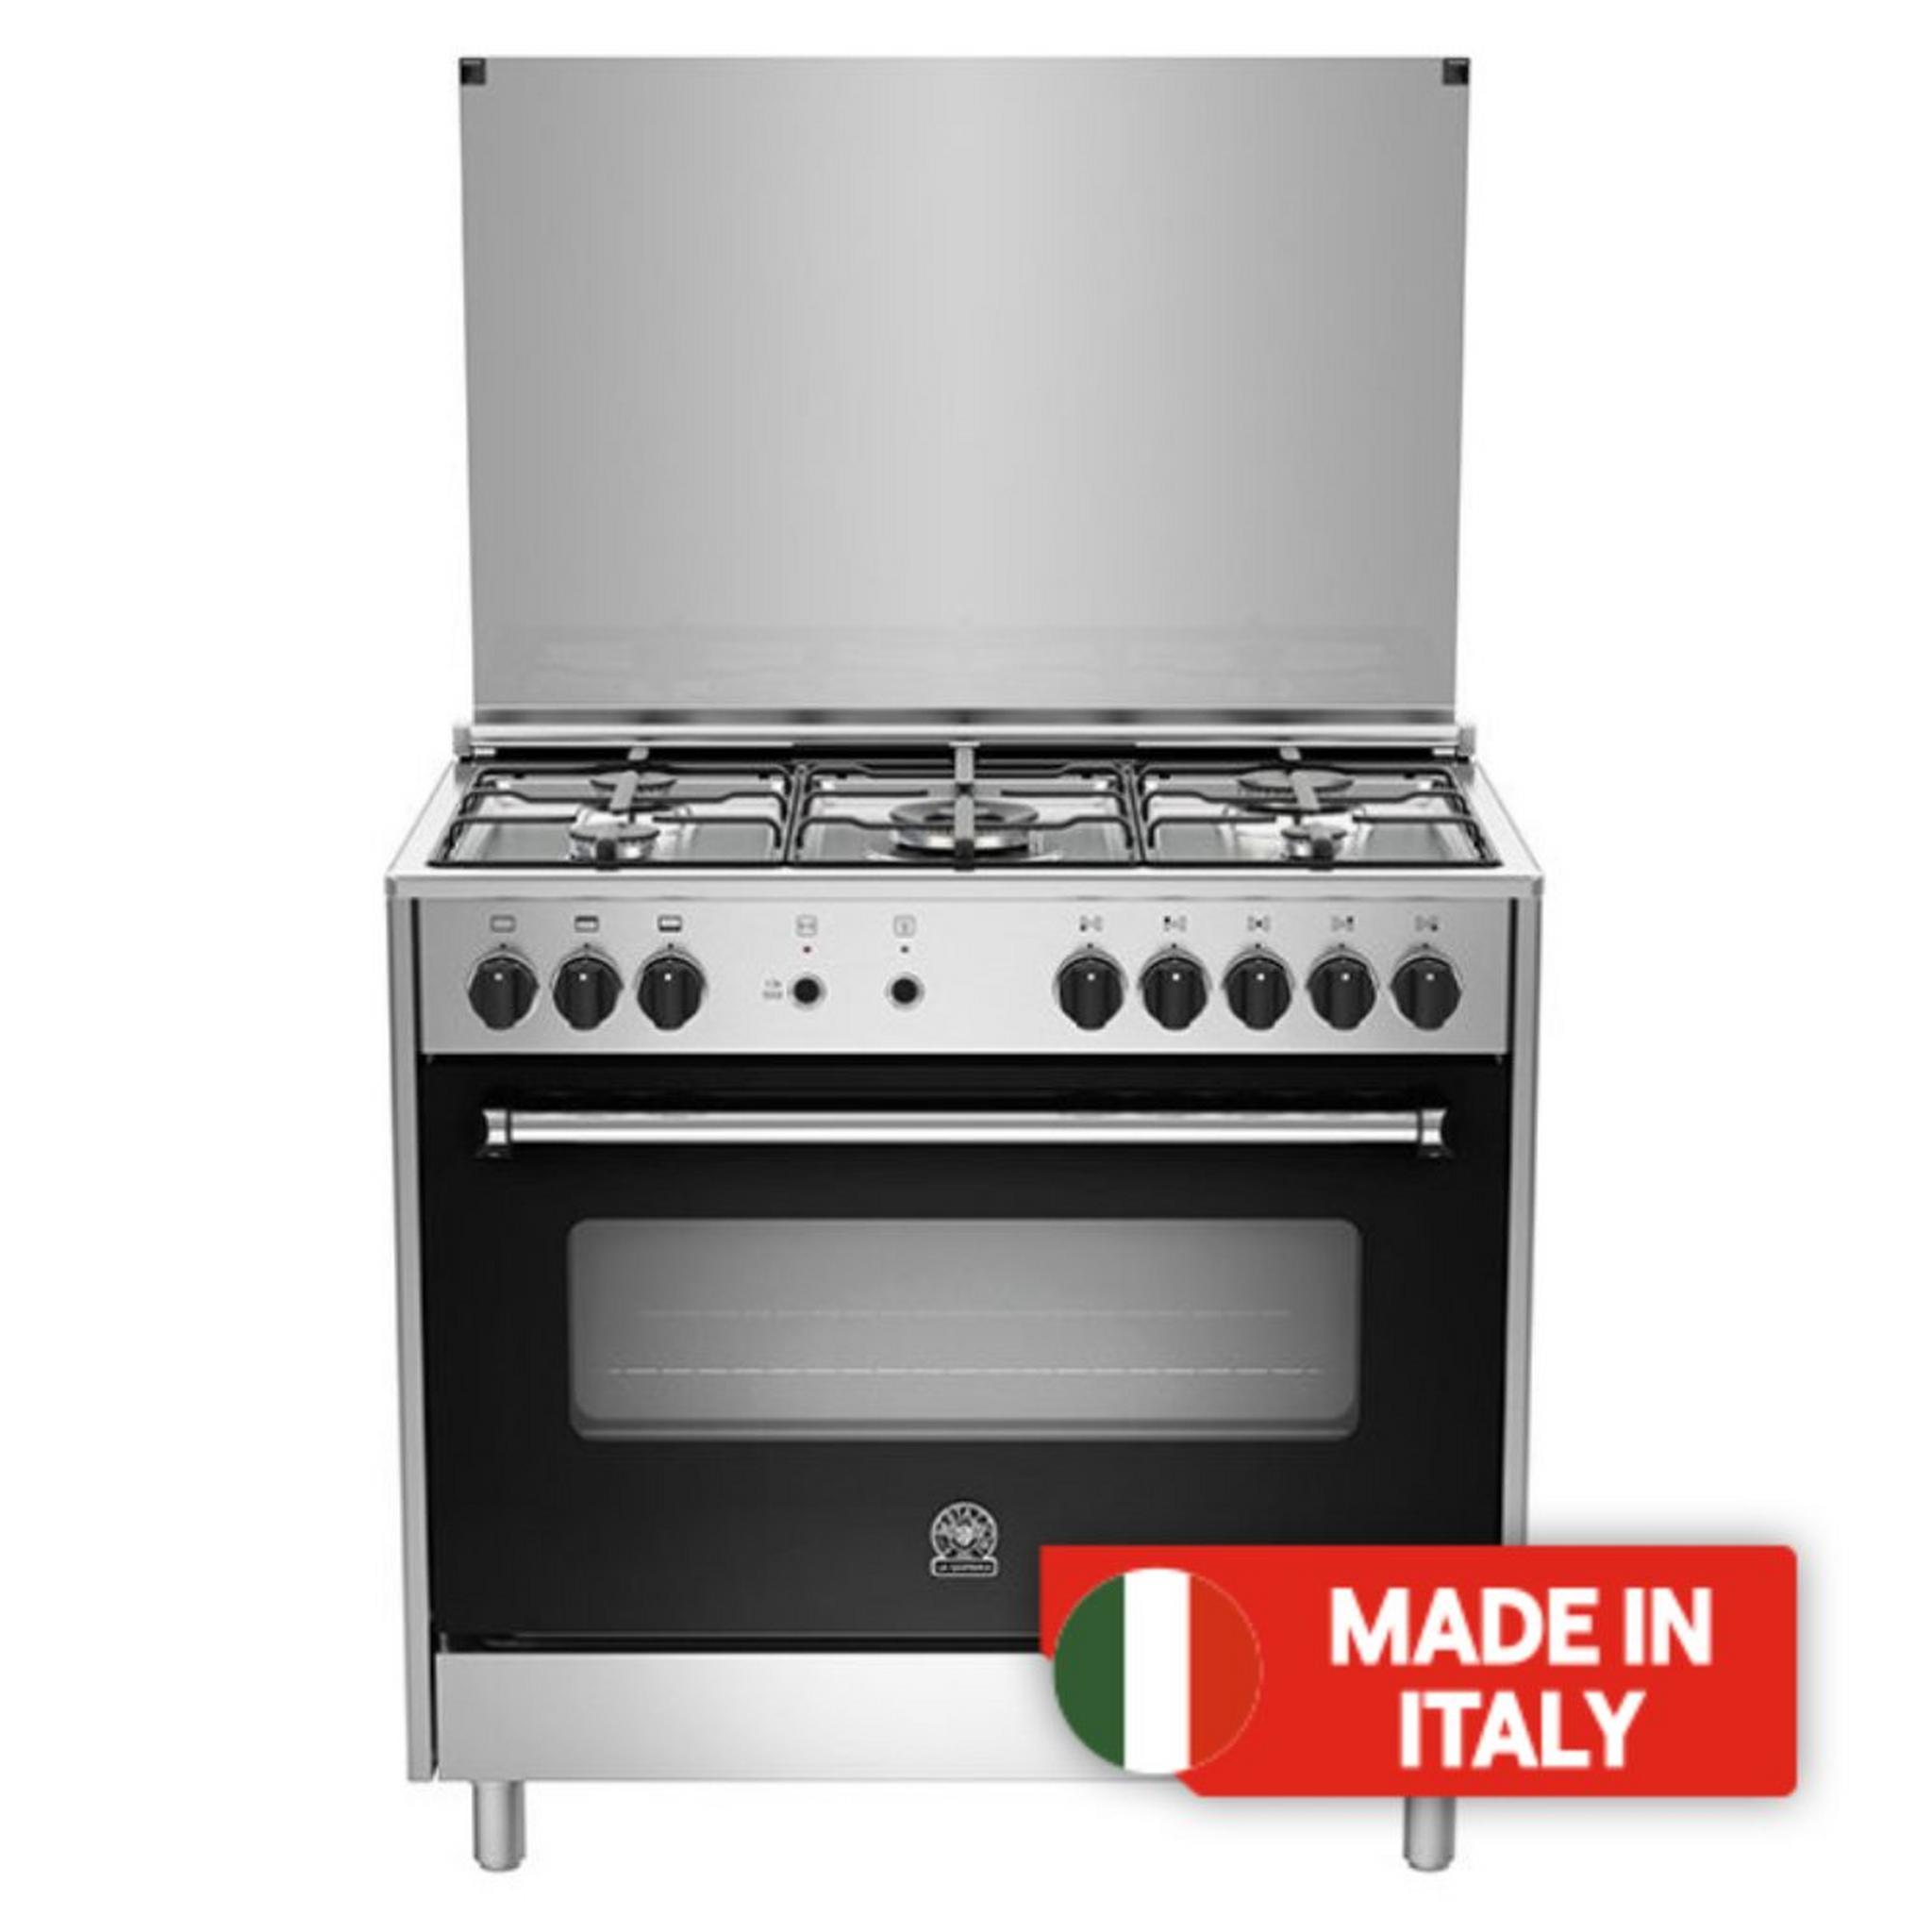 Lagermania 90x60 CM 5 Burners Gas Cooker (AMS95C31DX) - Stainless Steel